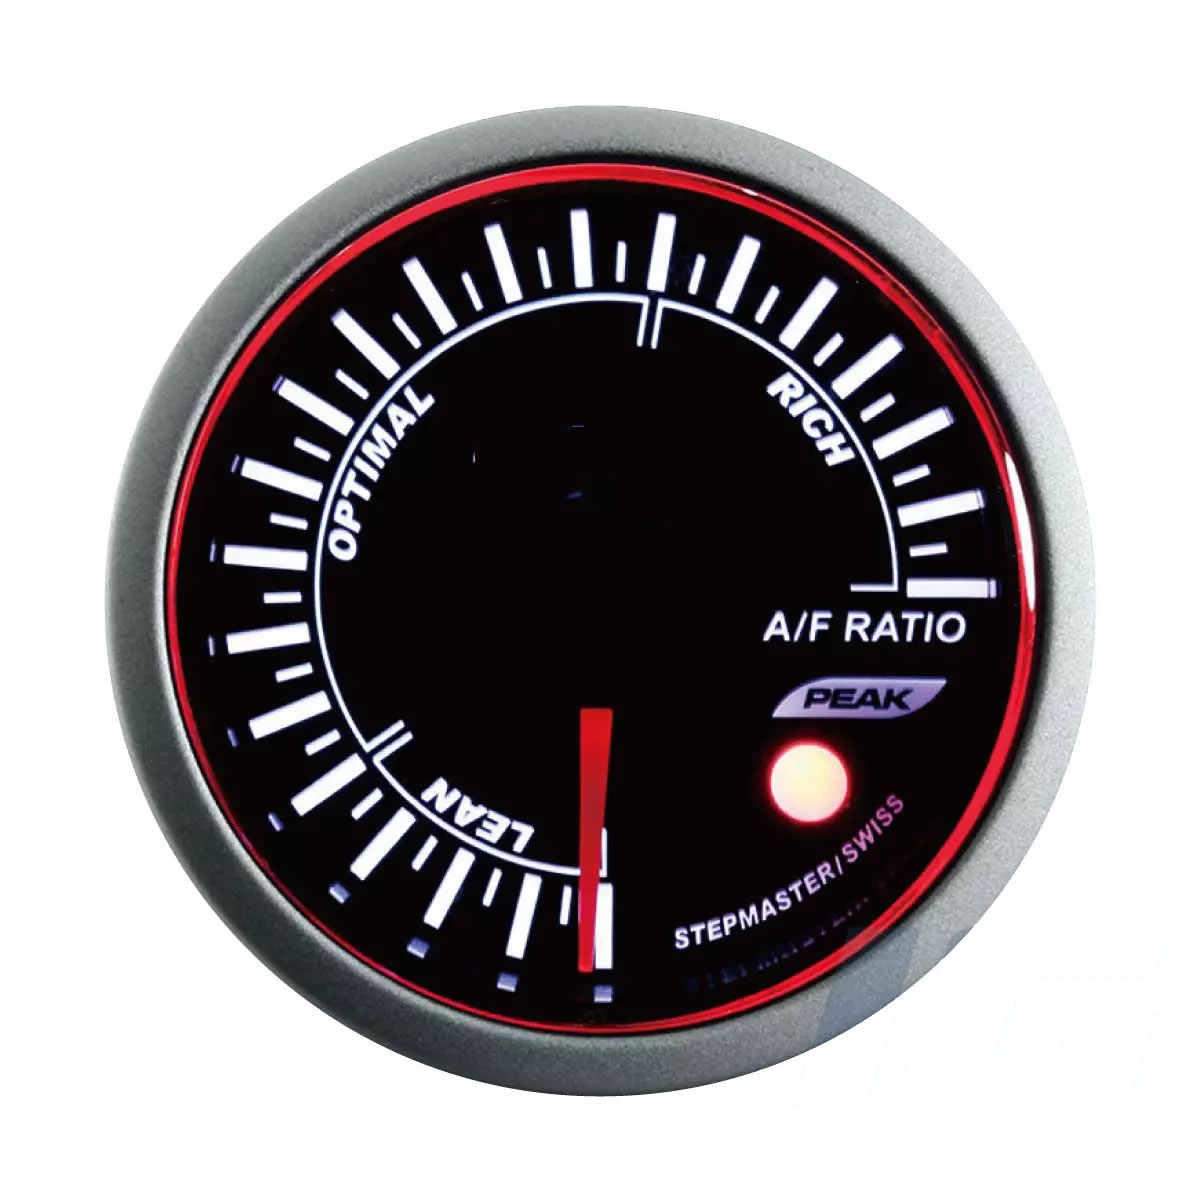 60mm White and Blue and Amber LED Performance Car Gauges - Air or Fuel Ratio Gauge With Warning or Peak For Your Sport Racing Car